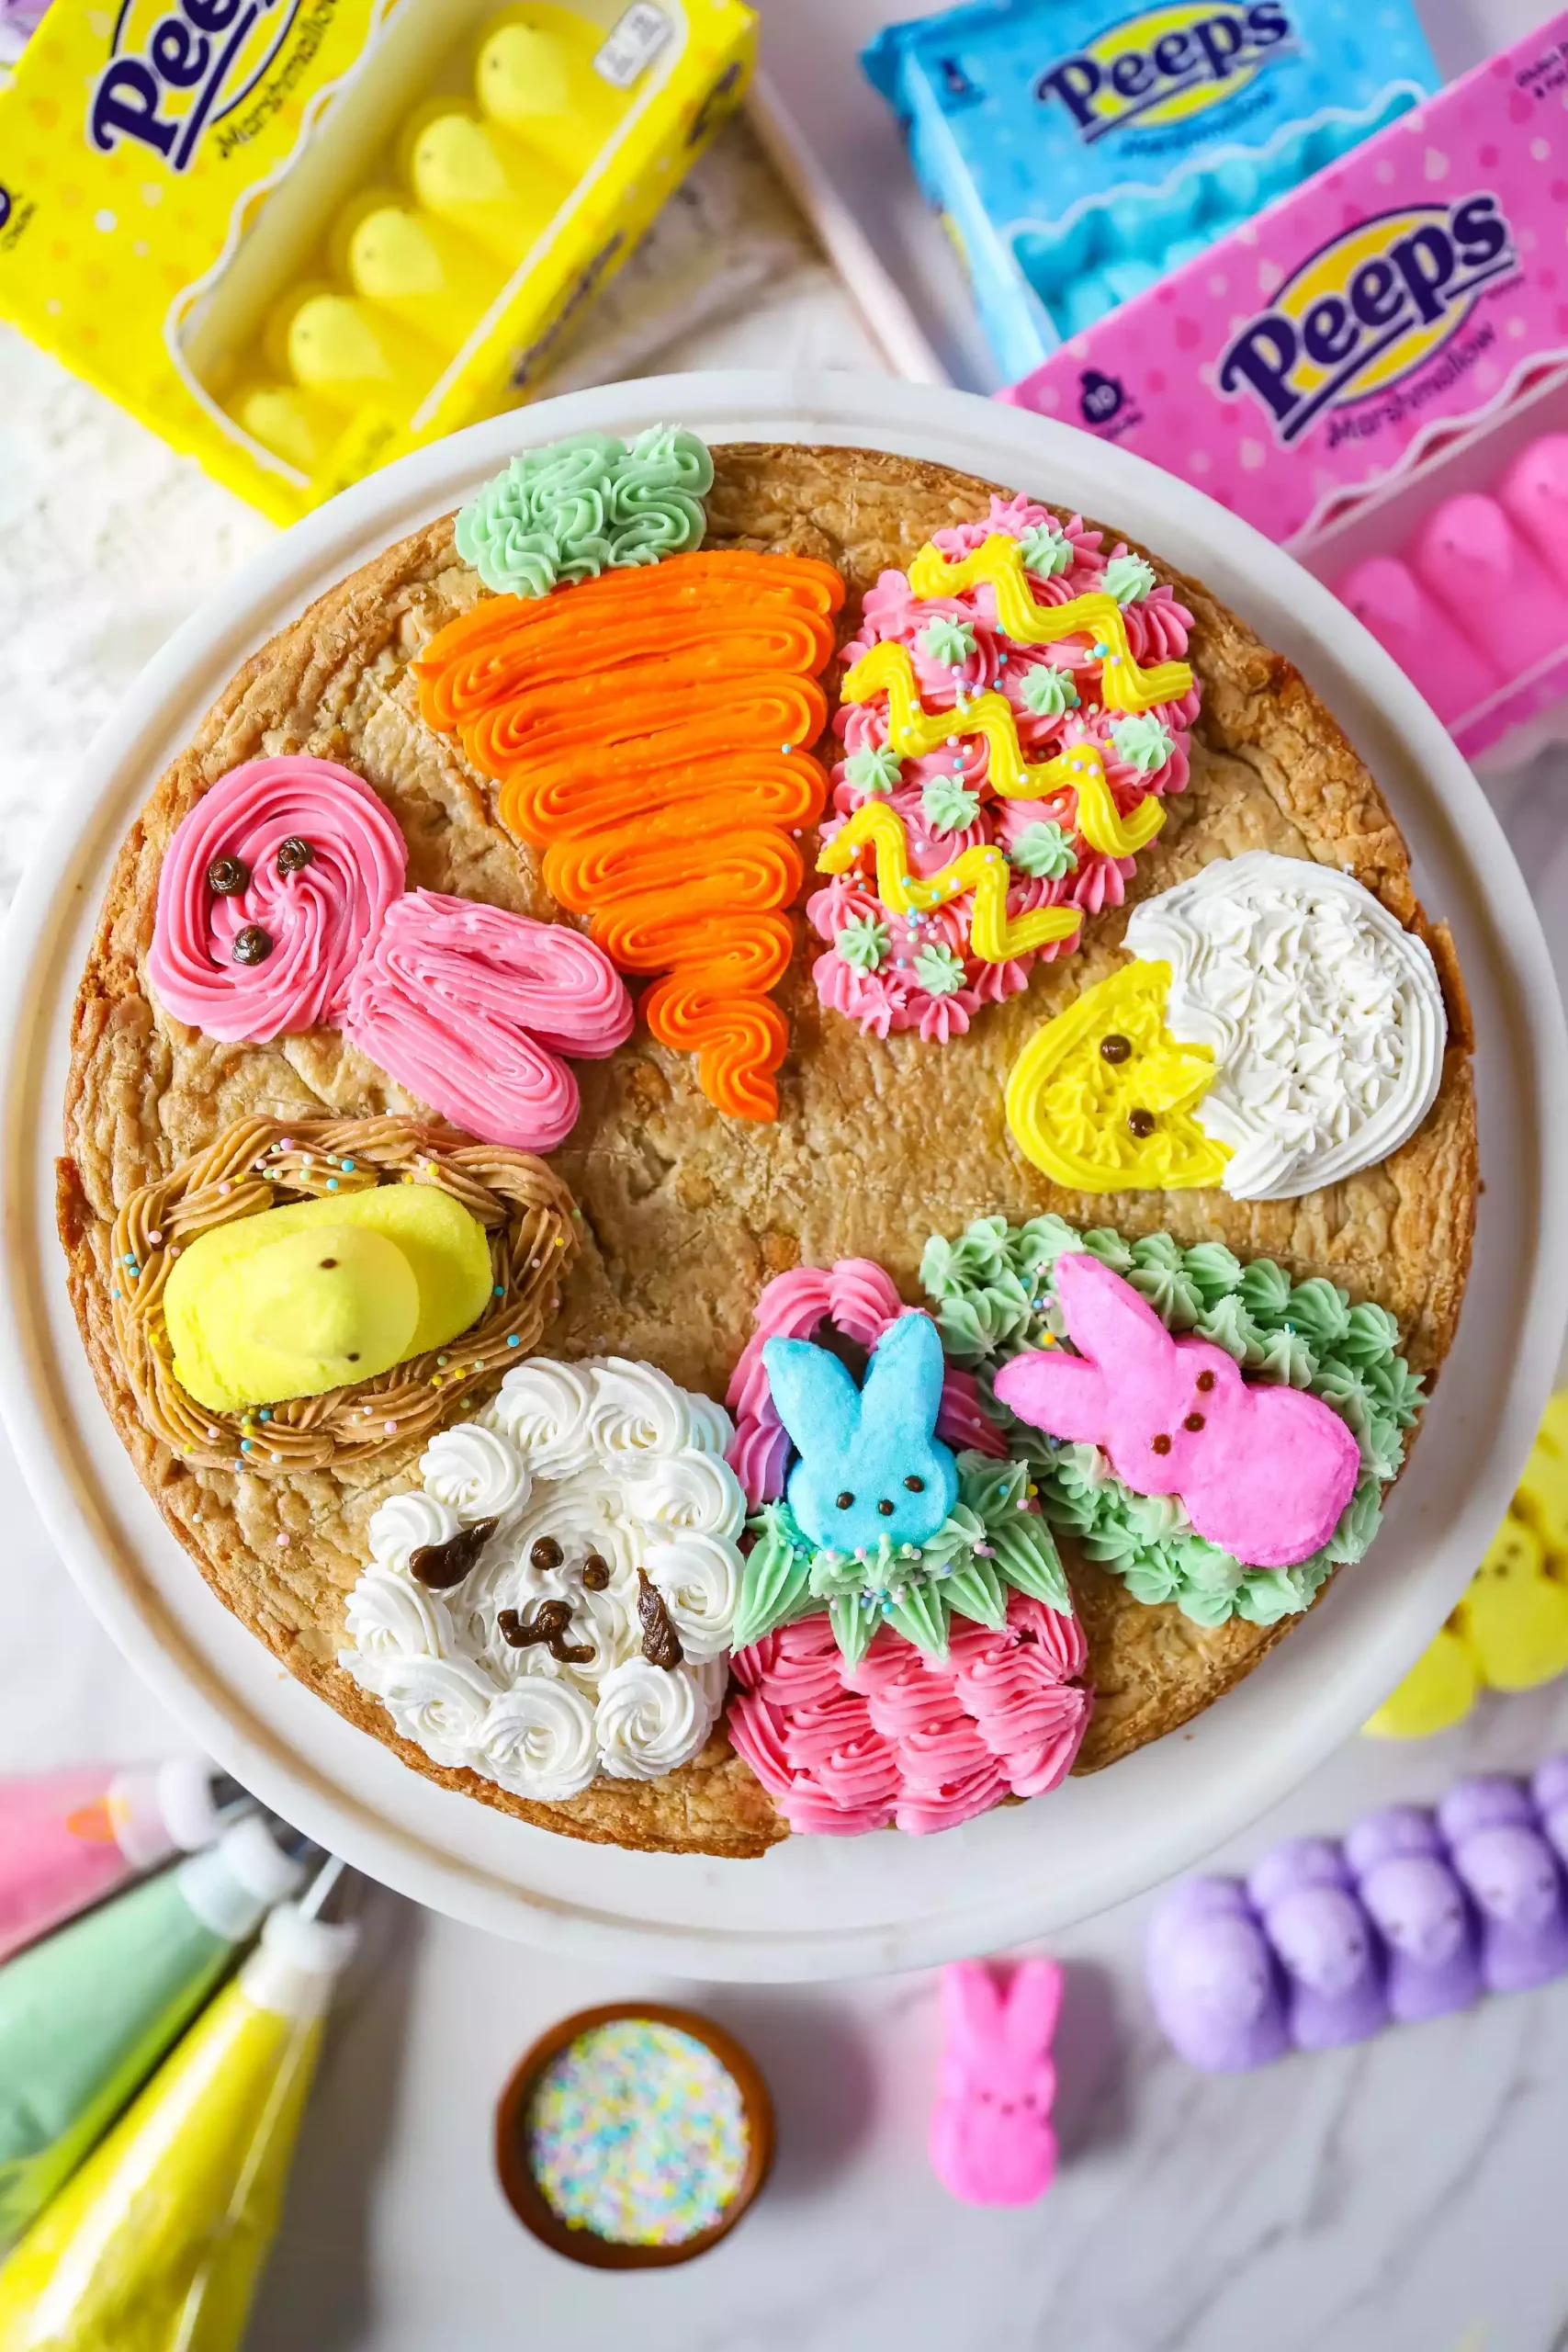 PEEPS<sup>®</sup> Decorated Cookie Cake